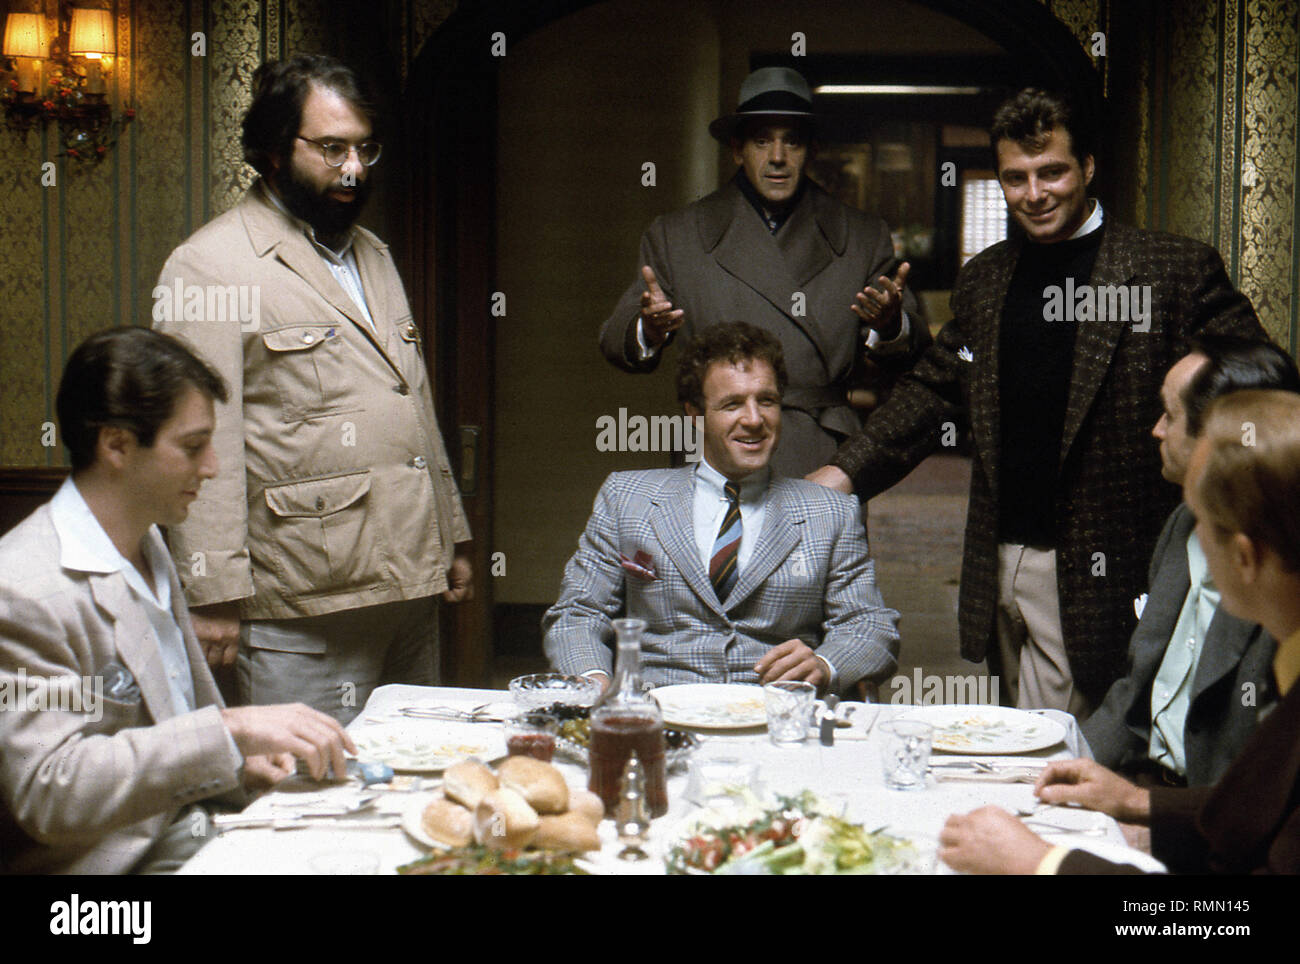 Al Pacino, Director Francis Ford Coppola, Abe Vigoda, James Caan, Gianni Russo, John Cazale, Robert Duvall, 'The Godfather' (1972) Paramount Pictures  File Reference # 33751 373THA Stock Photo